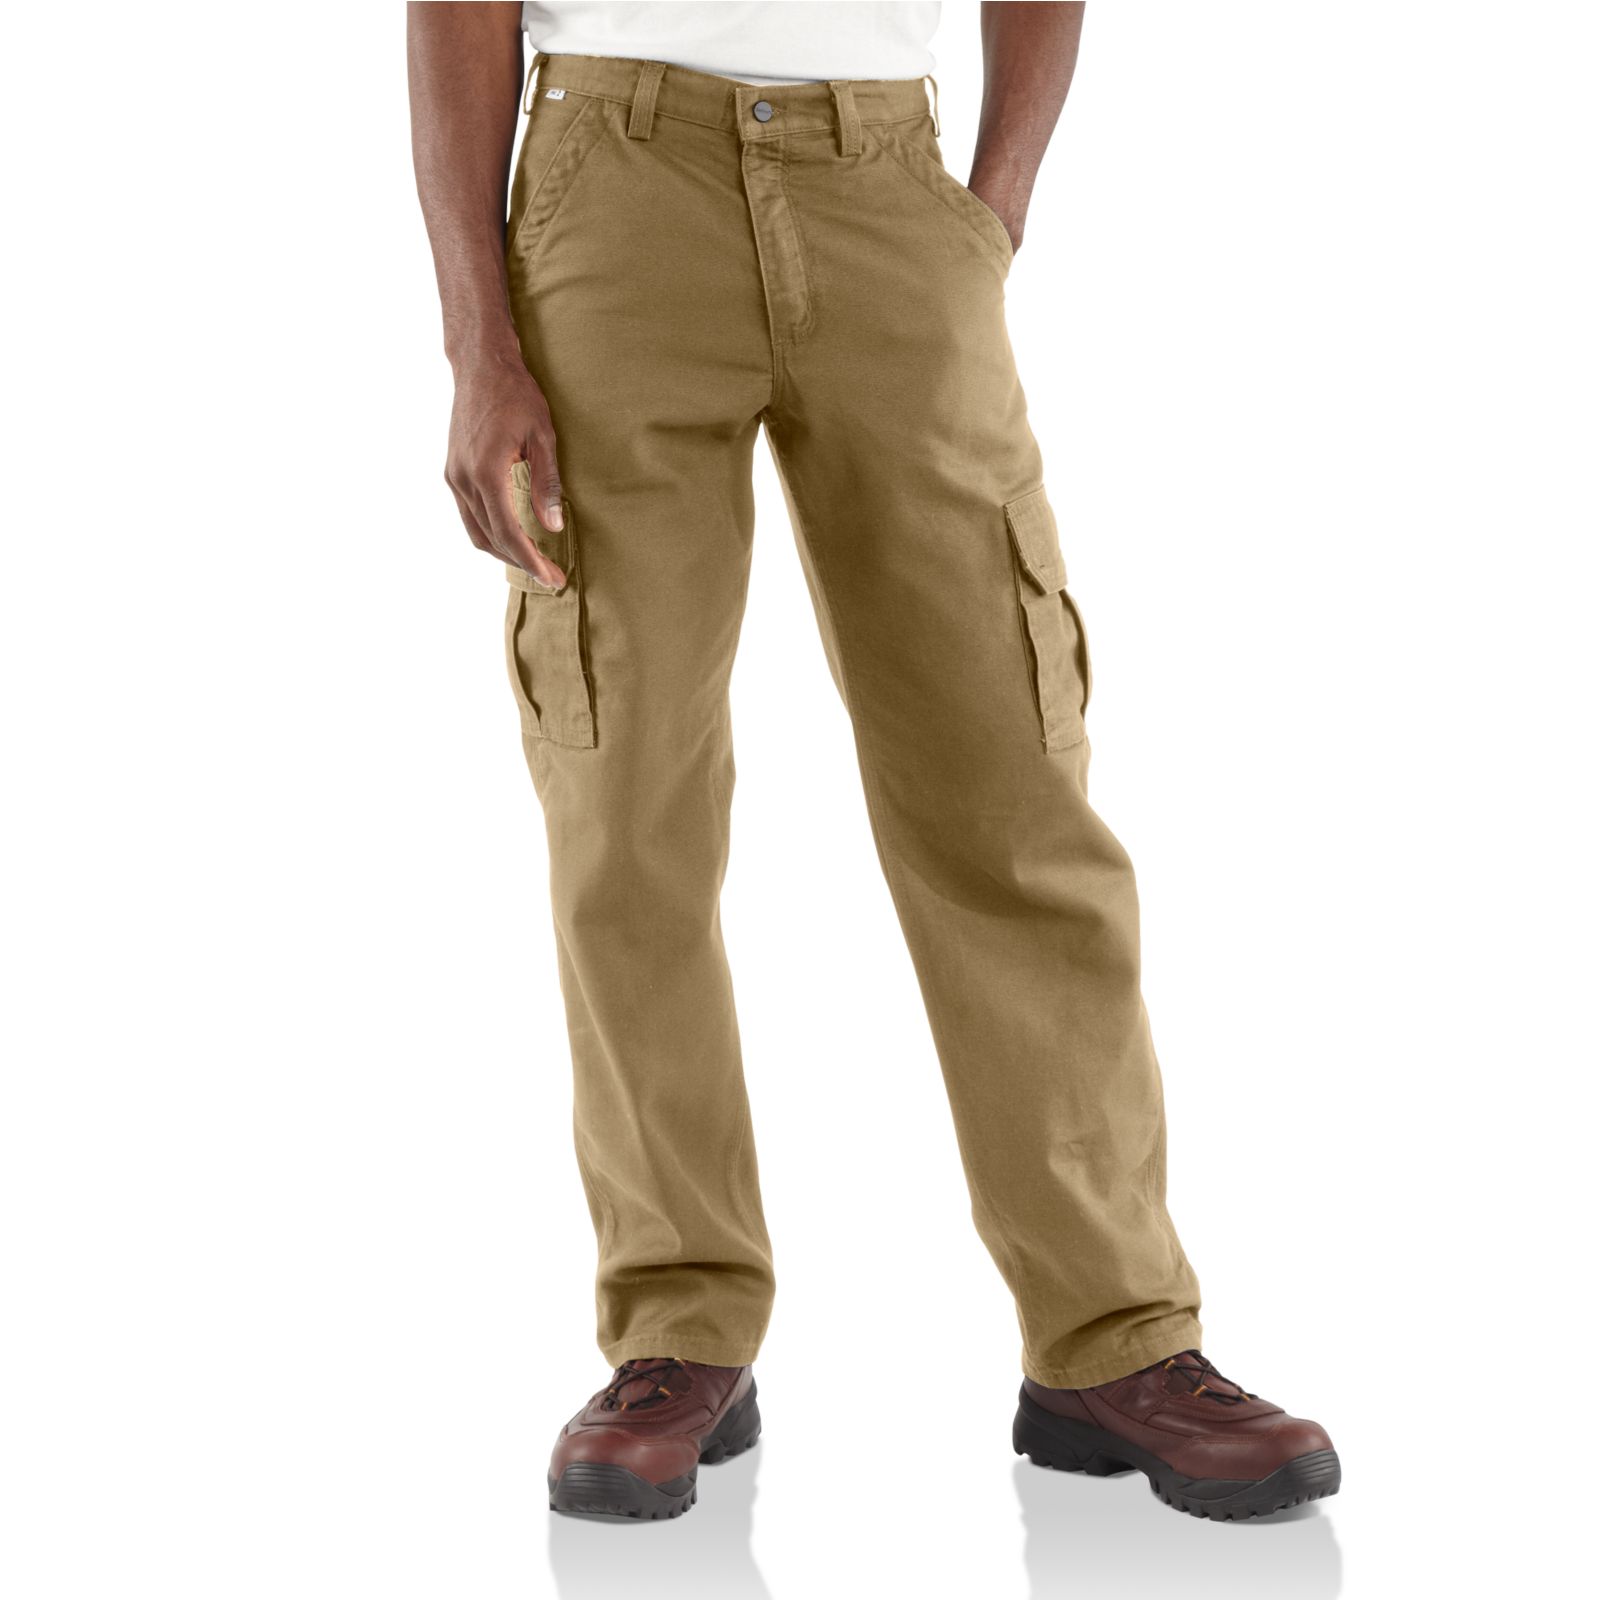 Wholesale Workwear Supplier: Uniforms and Flame-Resistant Clothing